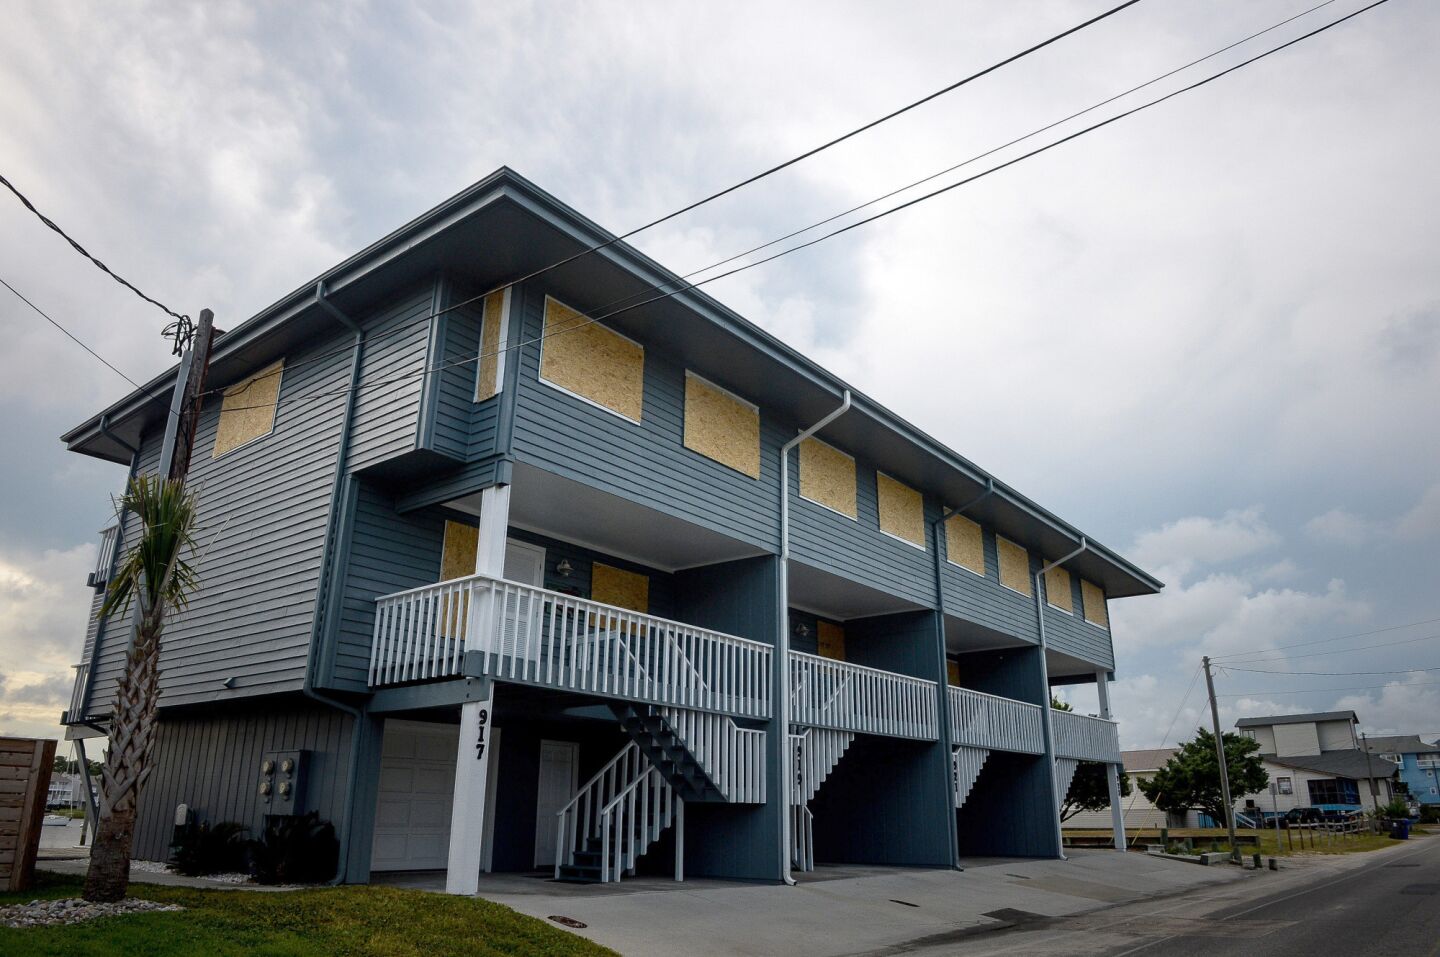 Plywood protects the doors and windows of a property ahead of Hurricane Florence in Carolina Beach, N.C.